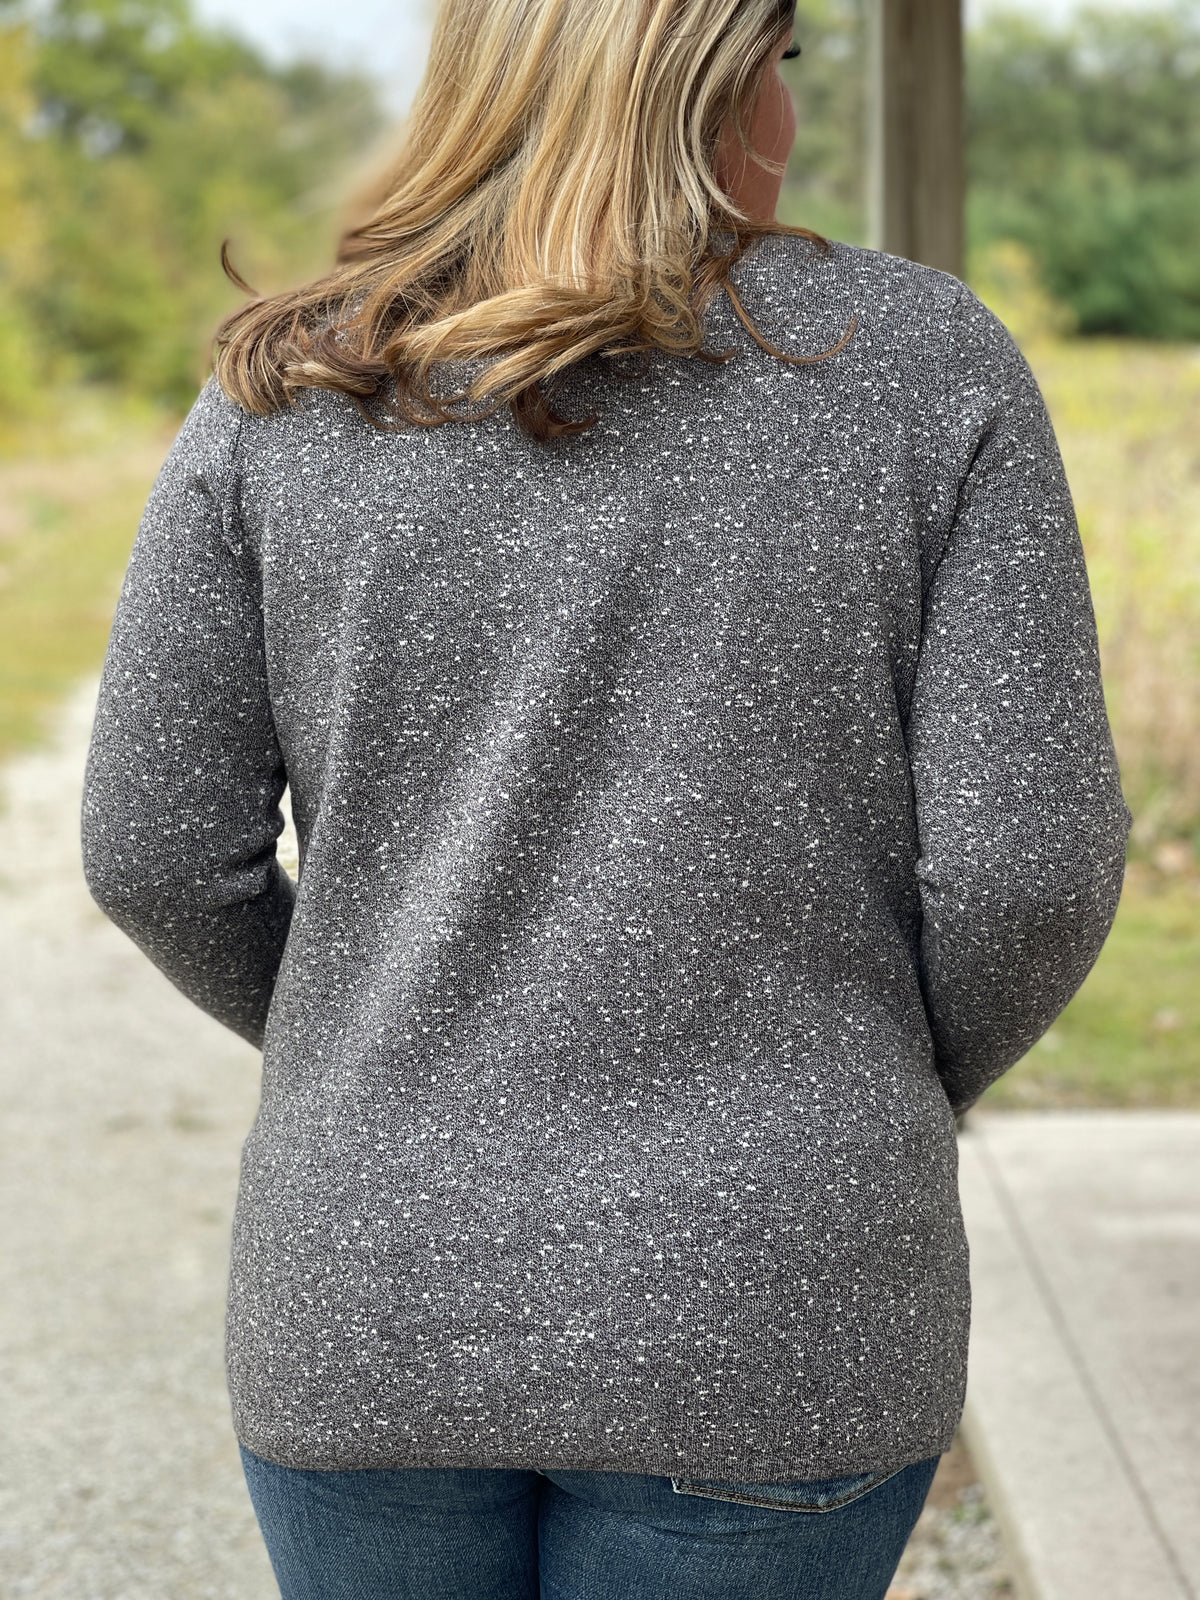 GREY/WHITE SPECKLE AND SHINE SWEATER